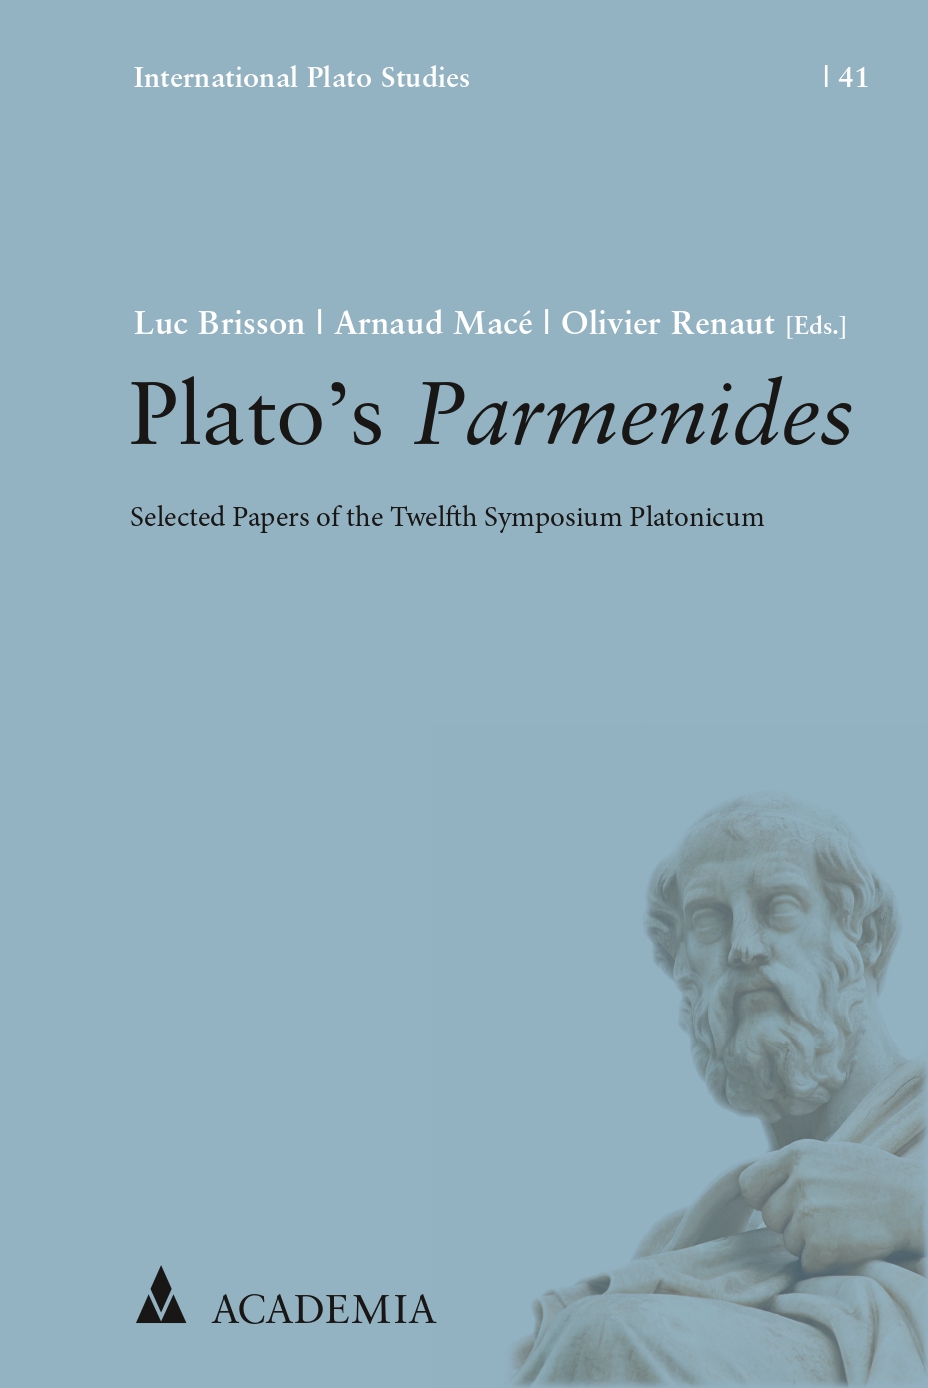 Plato’s Parmenides: Selected Papers of the Twelfth Symposium Platonicum